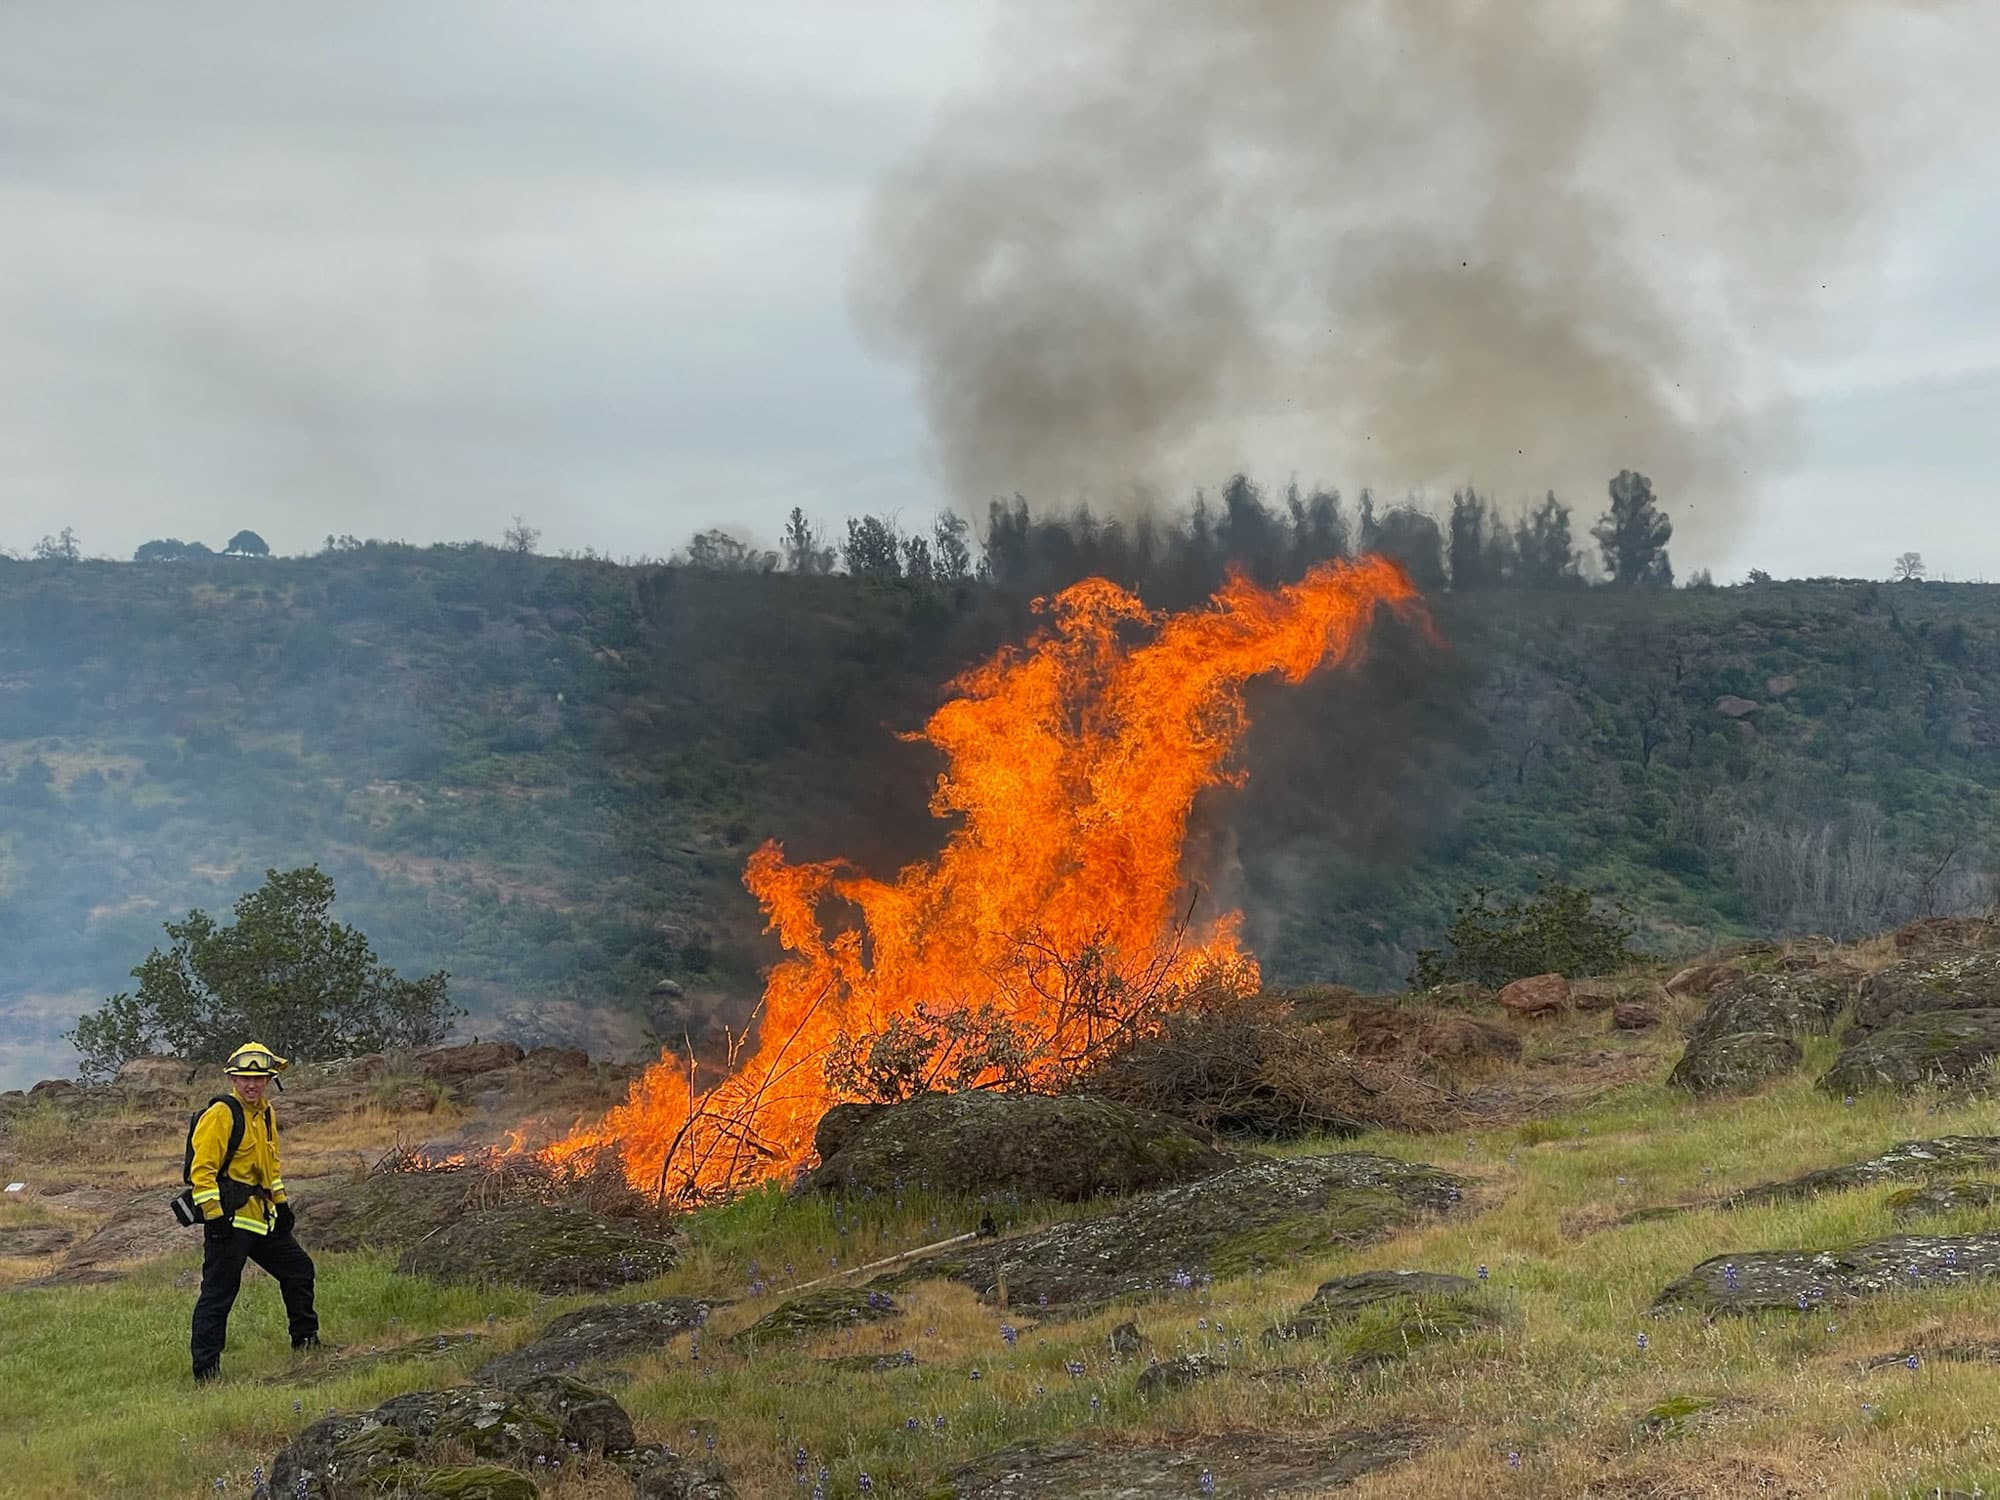 NCFF fire crews setting controlled burns to mitigate wildfire fuels